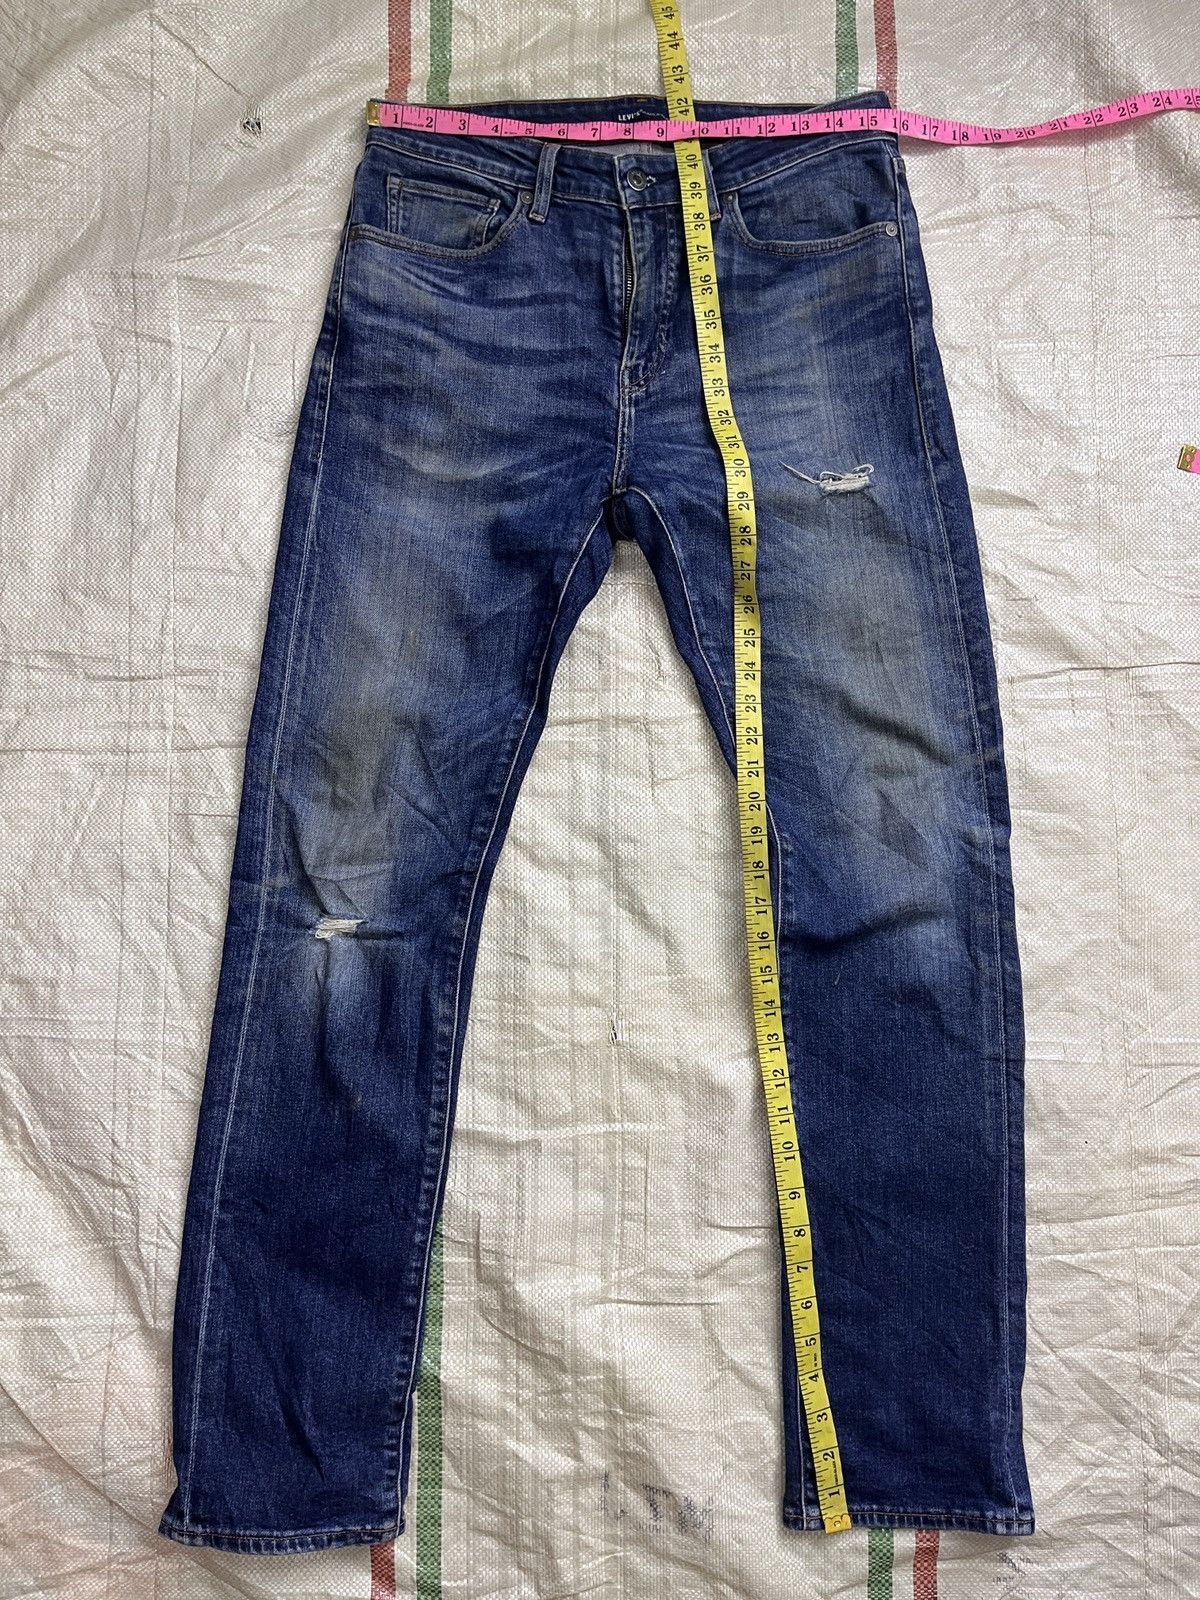 Levis Made & Crafted Blue Label Distressed Denim Jeans - 4